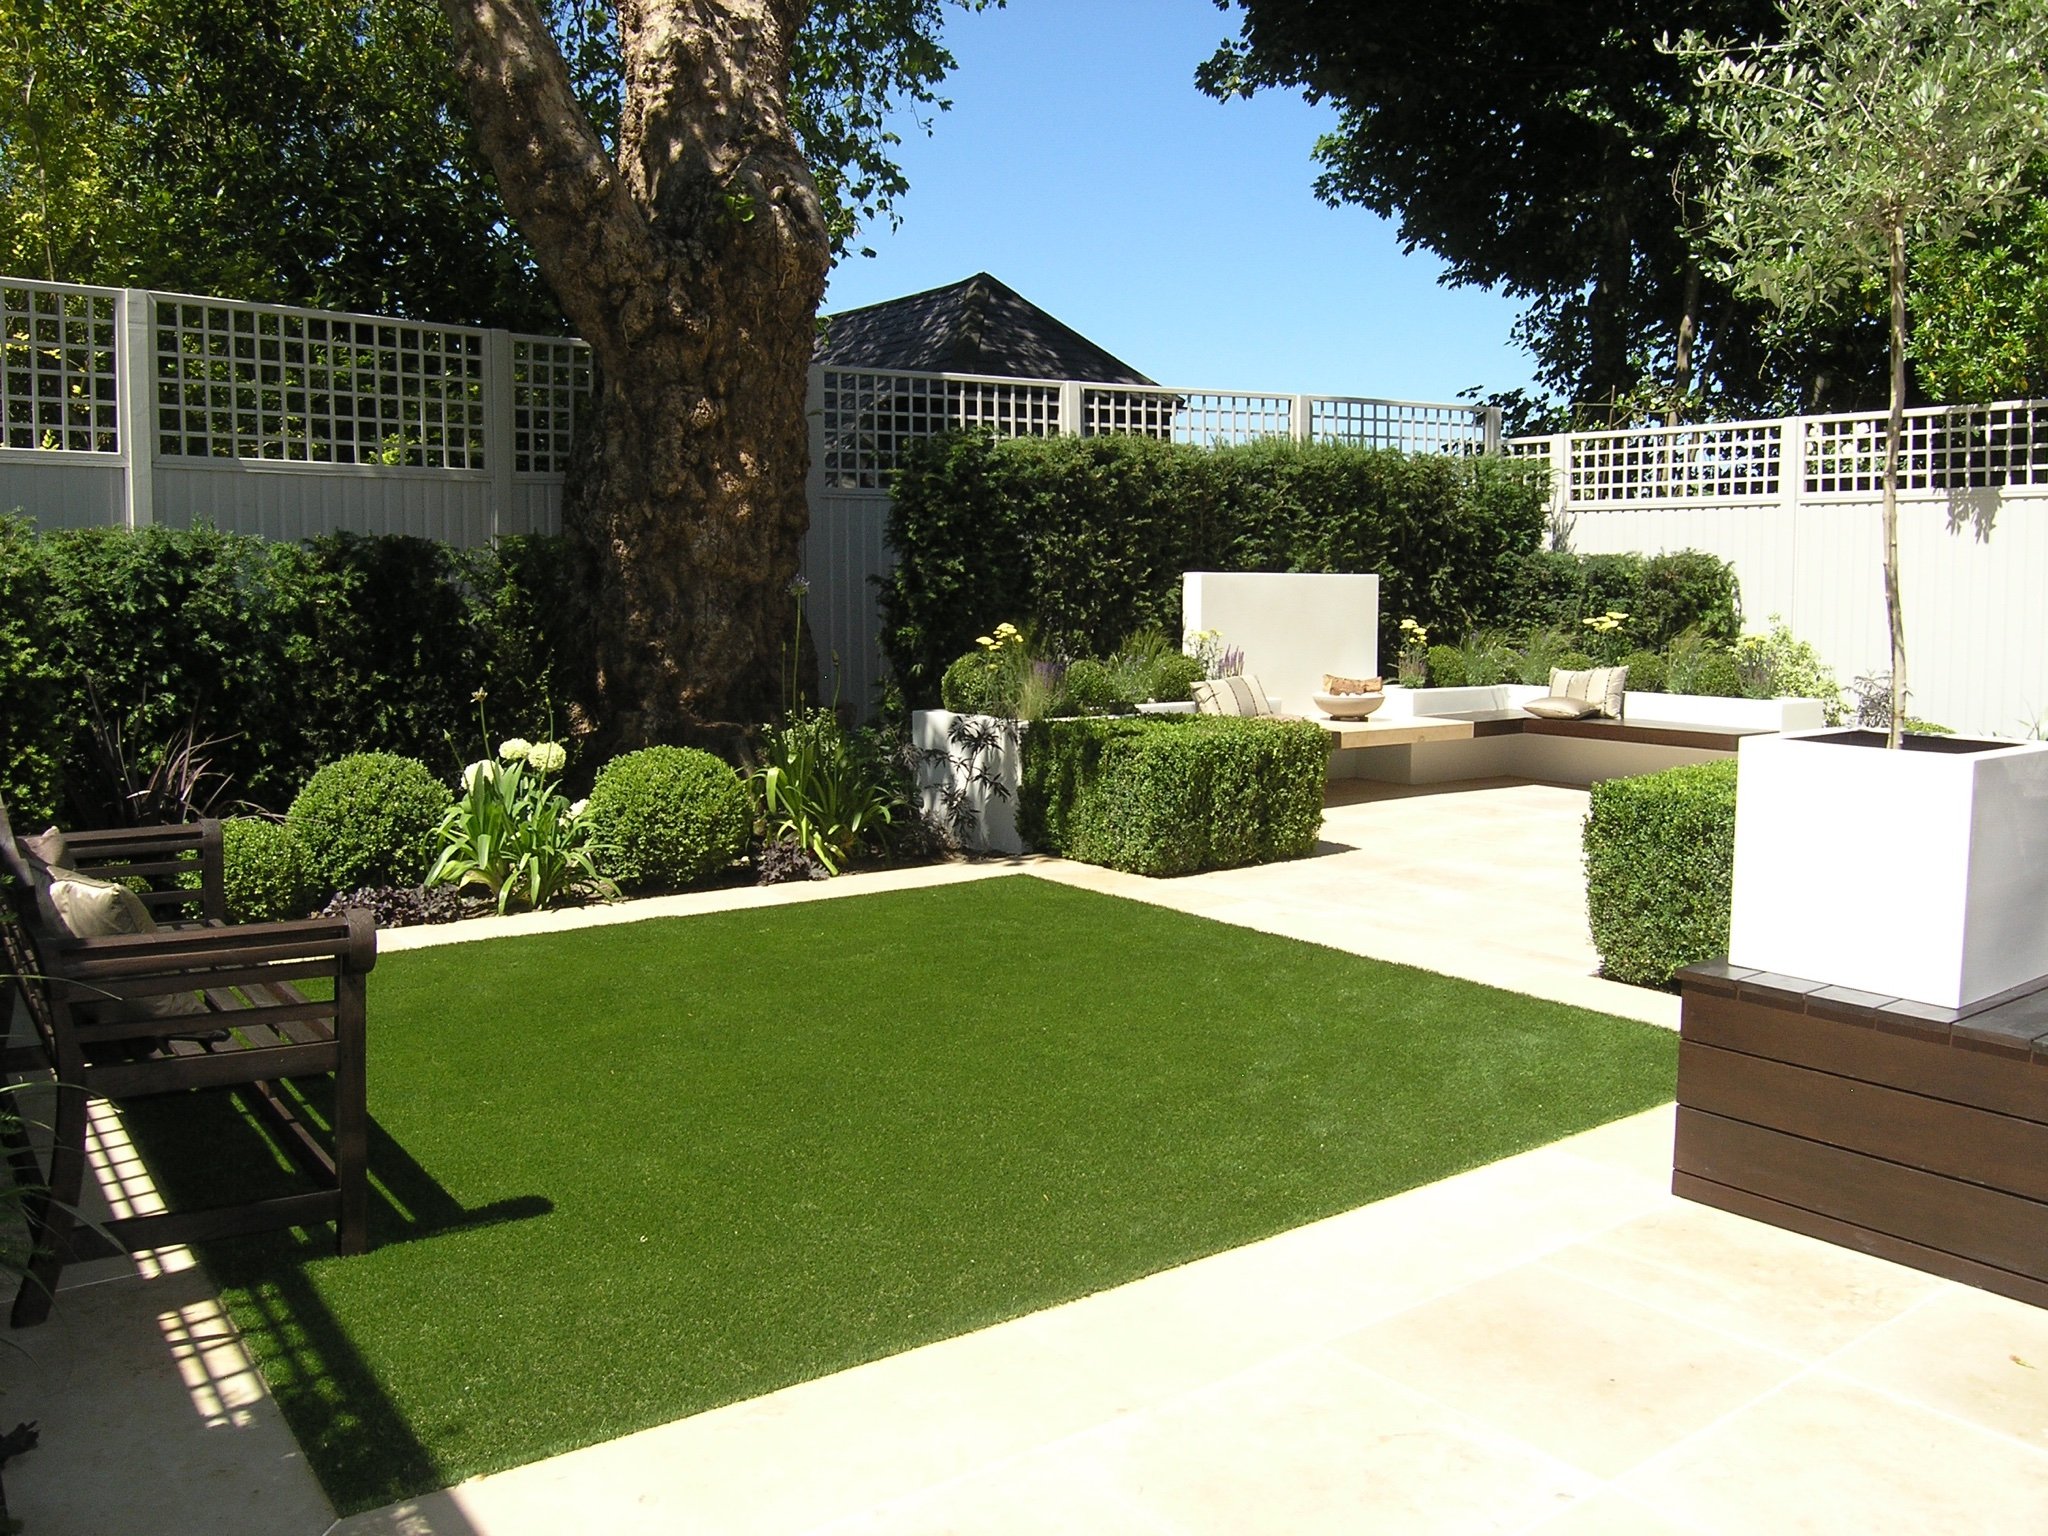 Modern garden design in North London N6 with outdoor rooms under a tree